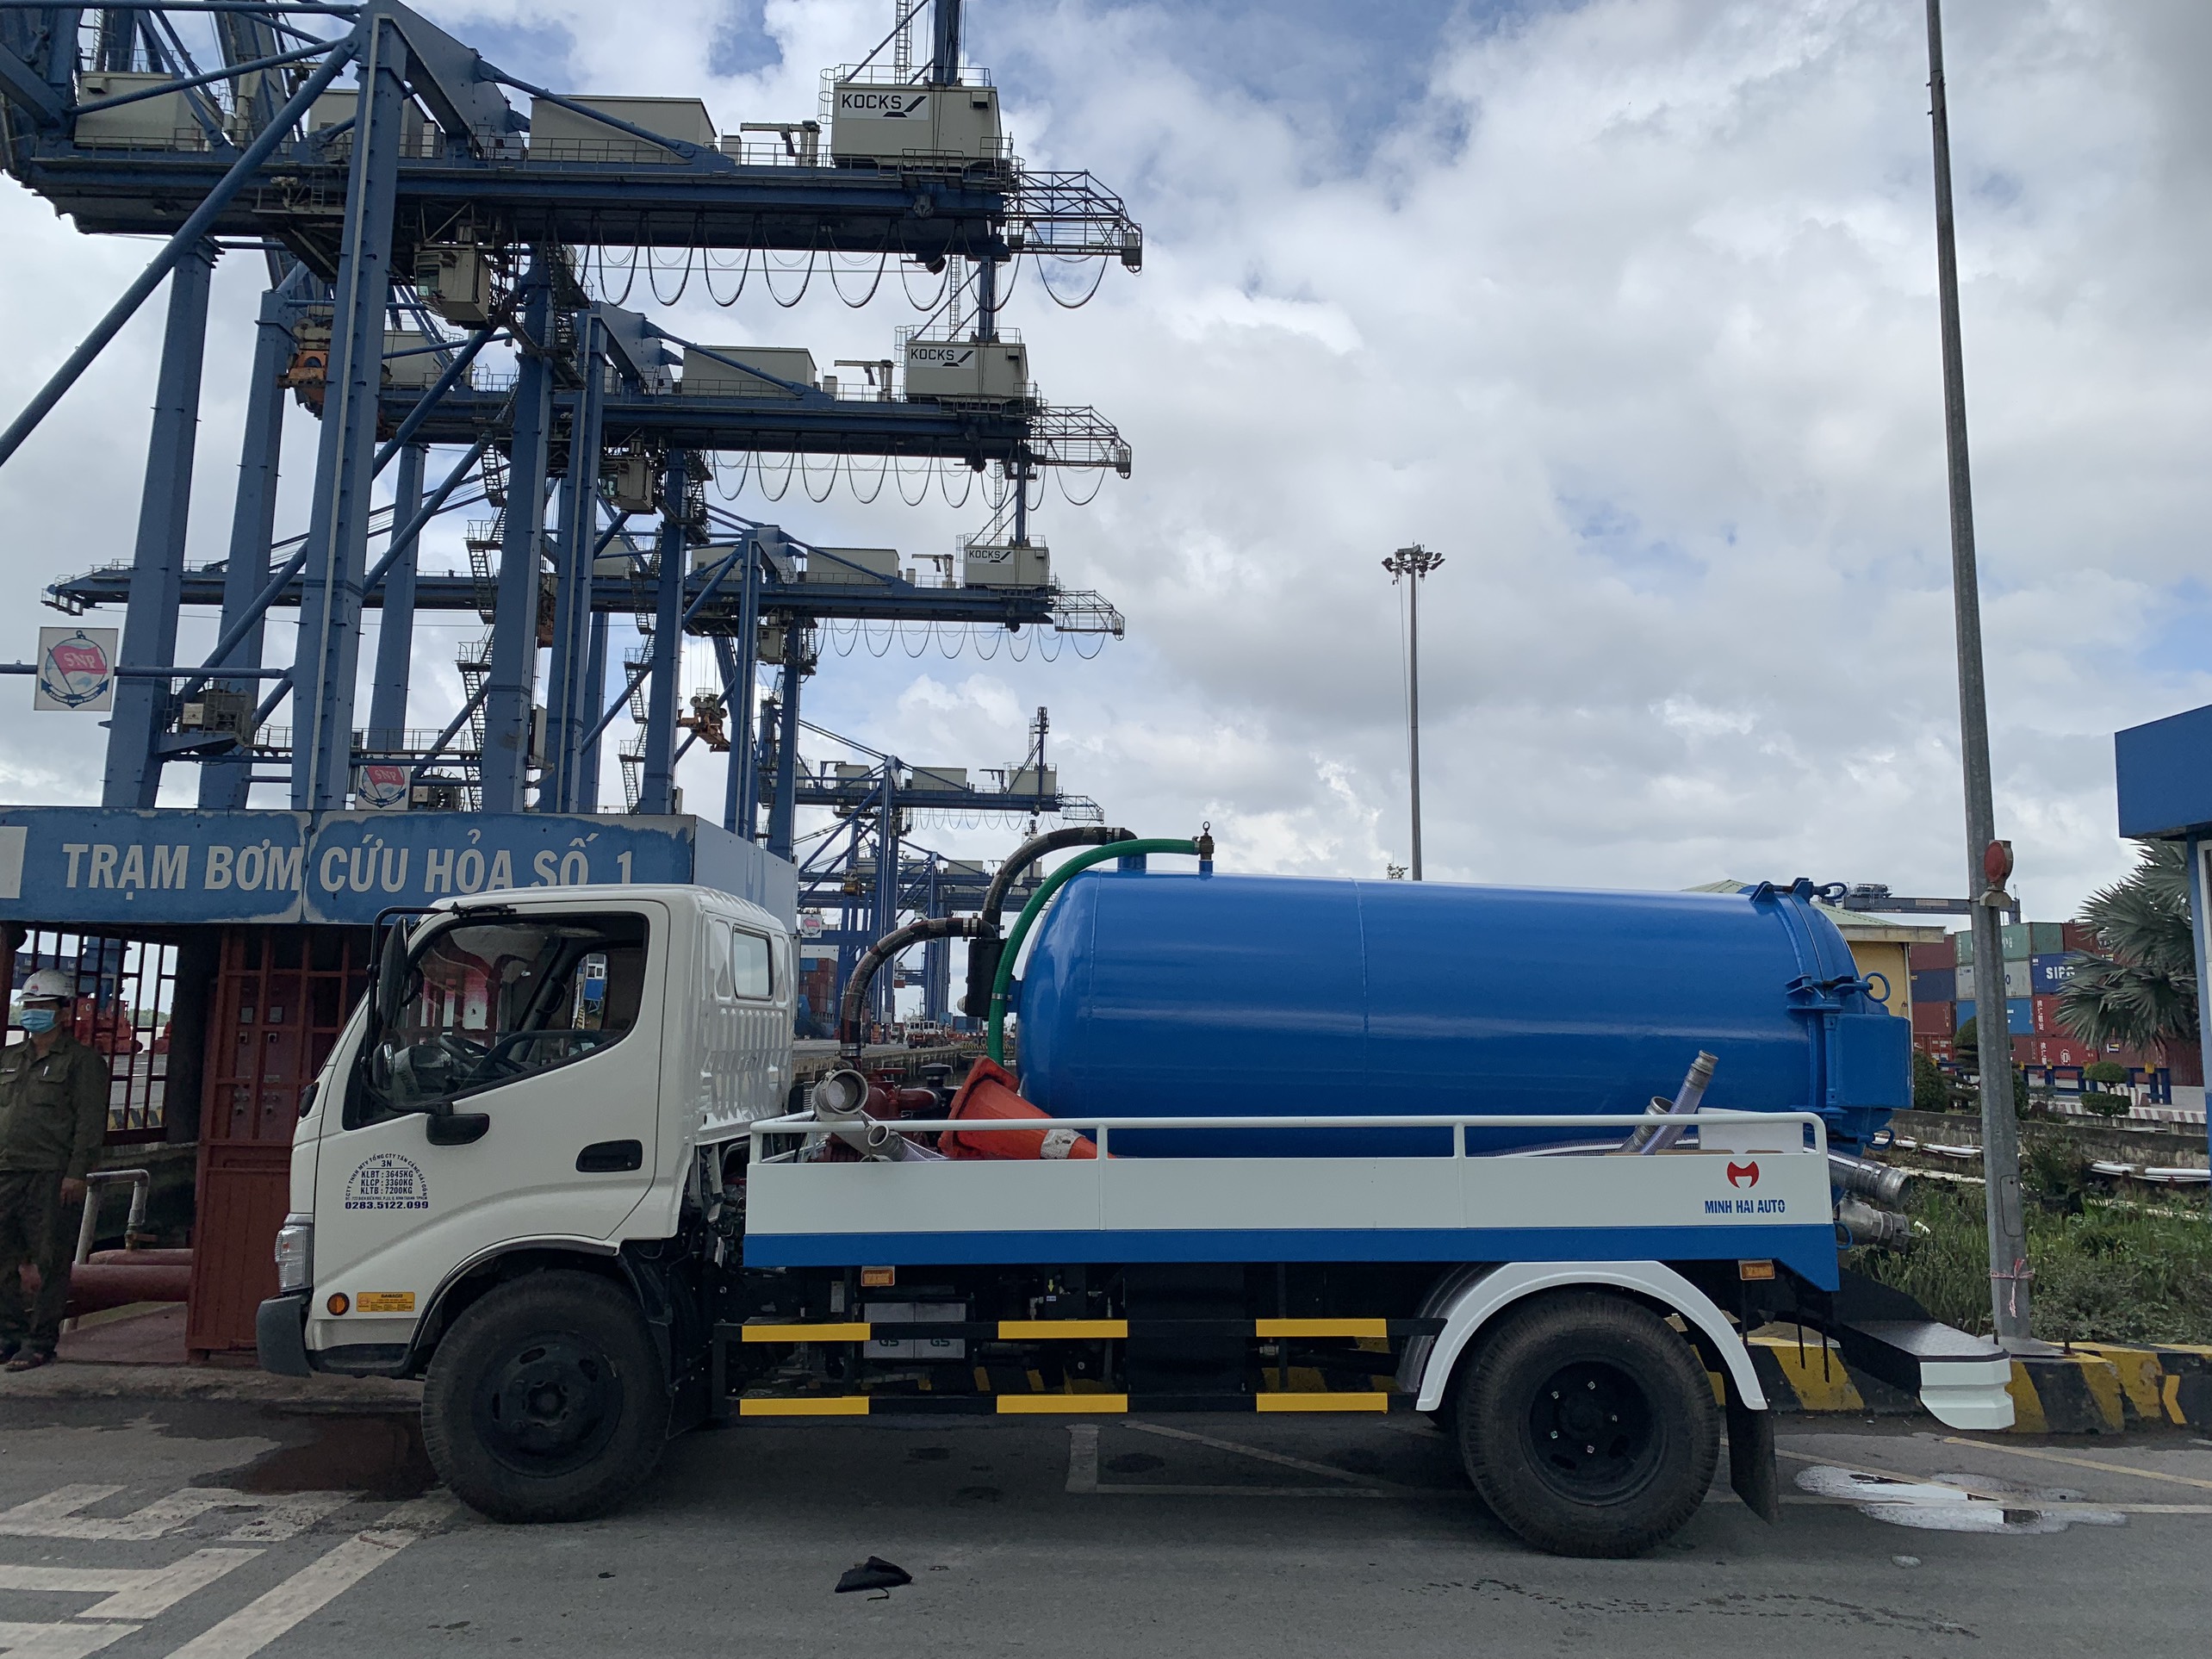 Sewage vacuum truck: collect and transport sewage in port, urban and cities